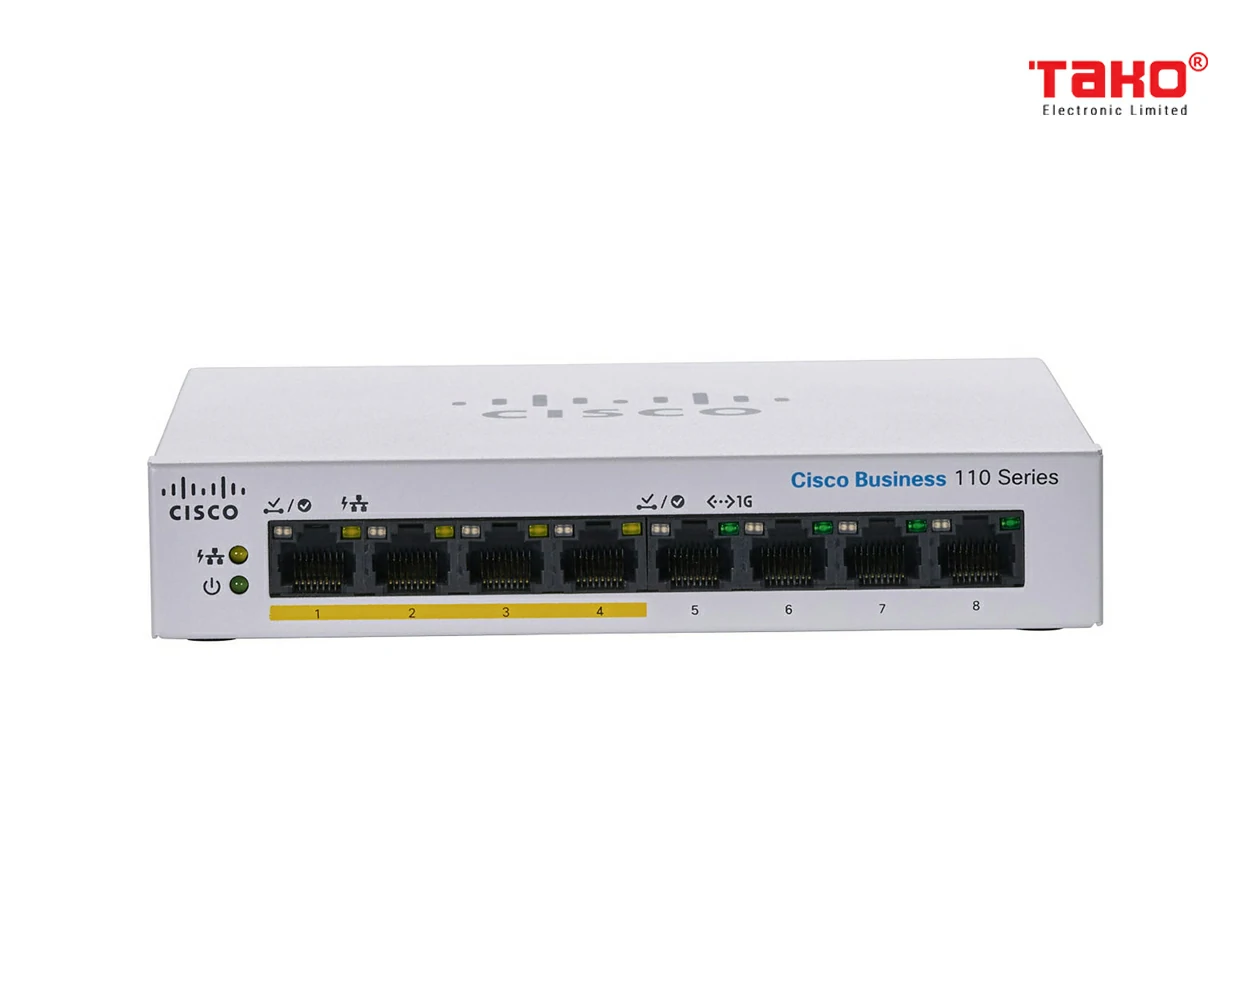 Cisco CBS110-8PP-D 8 port 10/100/1000 Mbps unmanageable switch, 4 of which are PoE 1